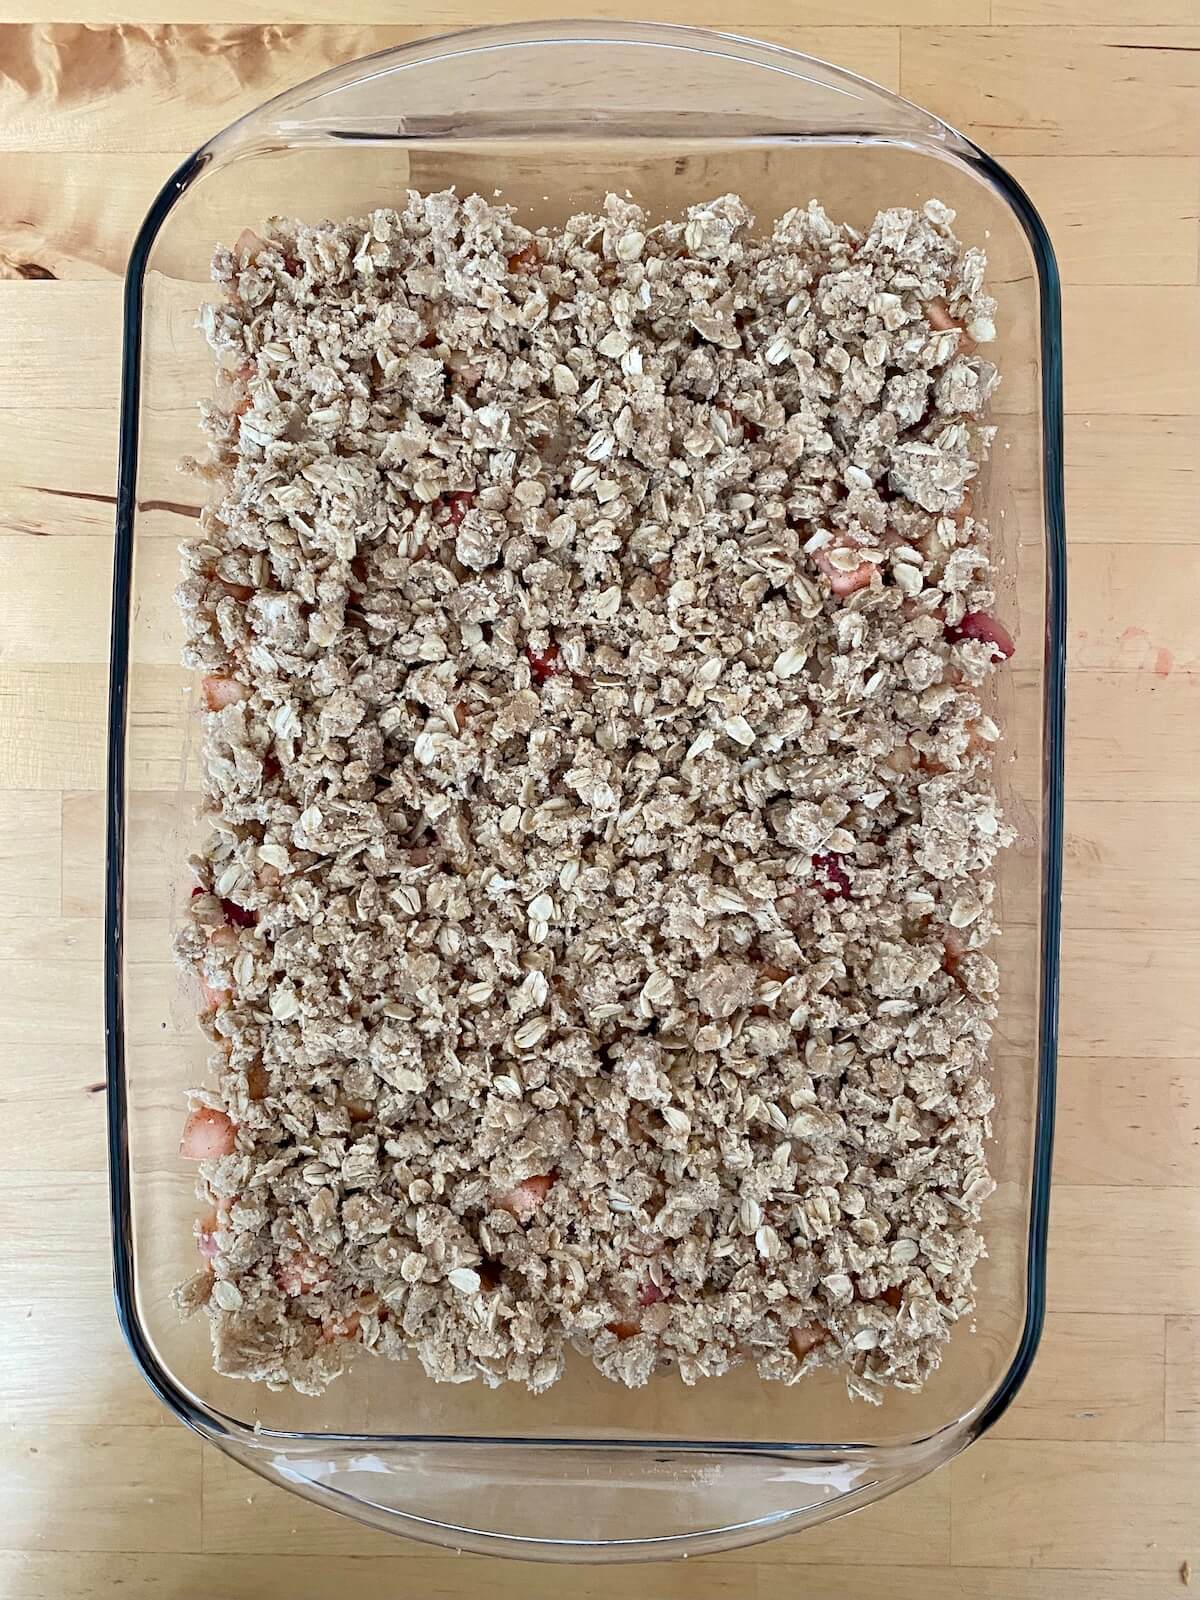 The assembled strawberry apple crisp before being baked.